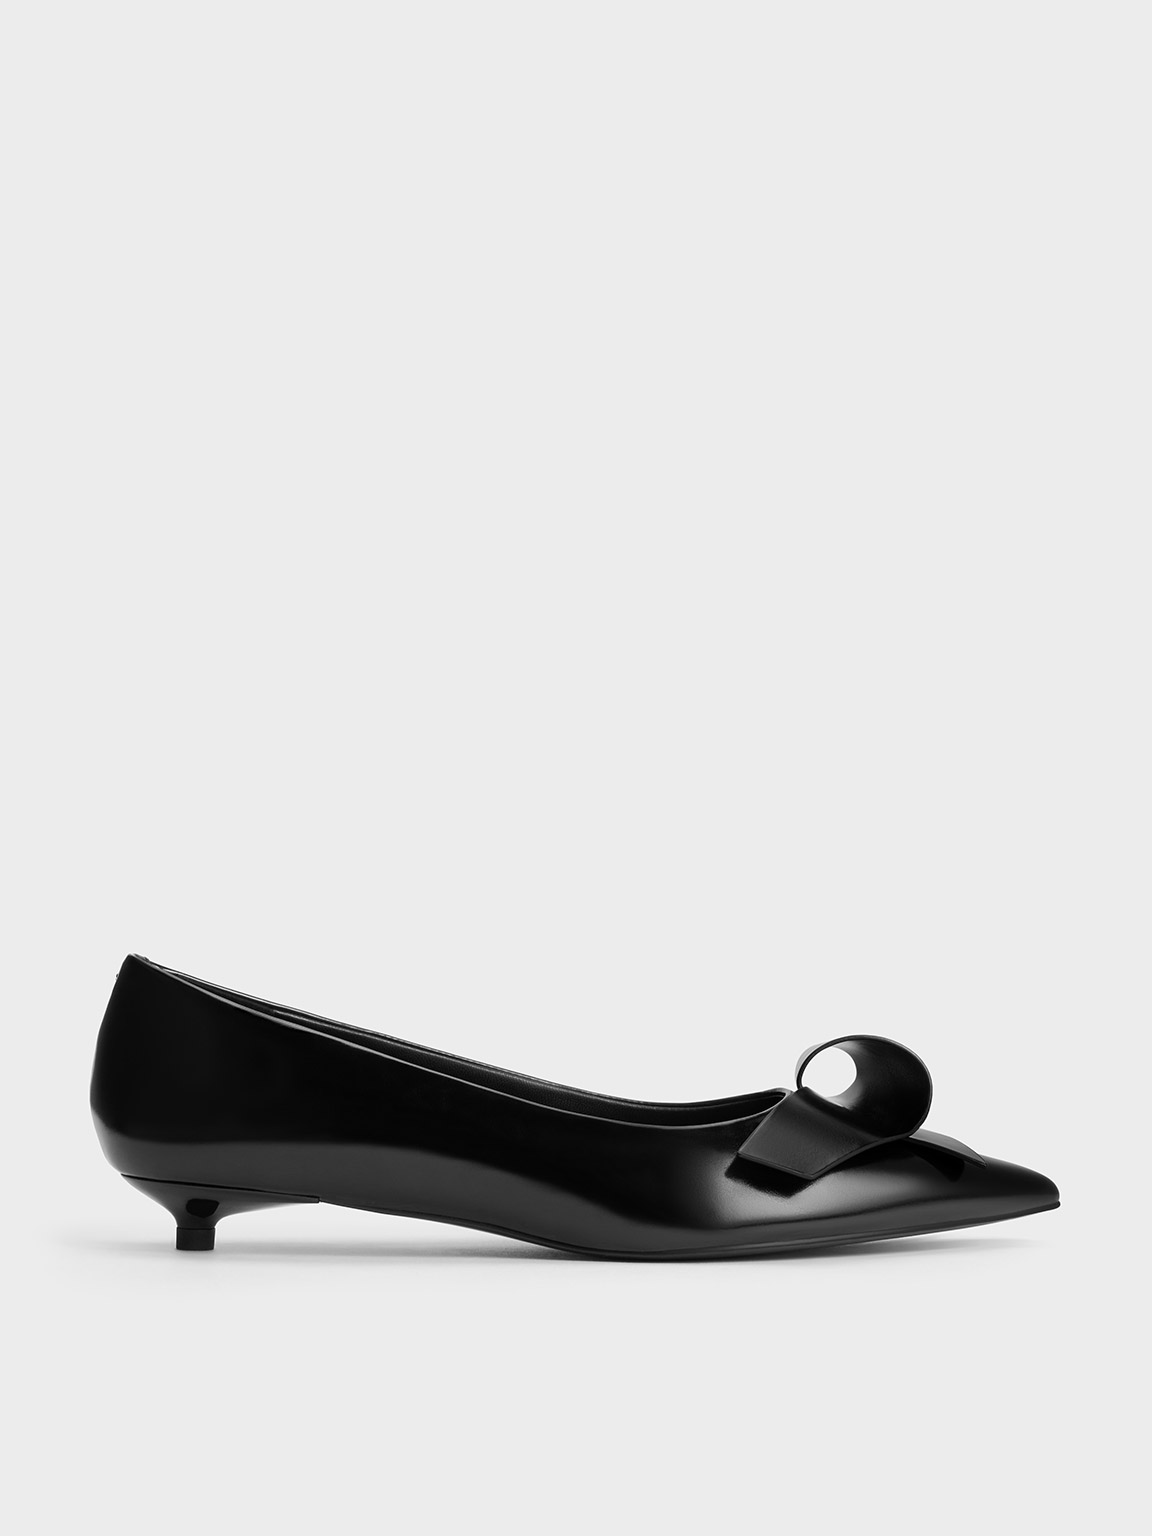 Sculptural Knot Pointed-Toe Flats